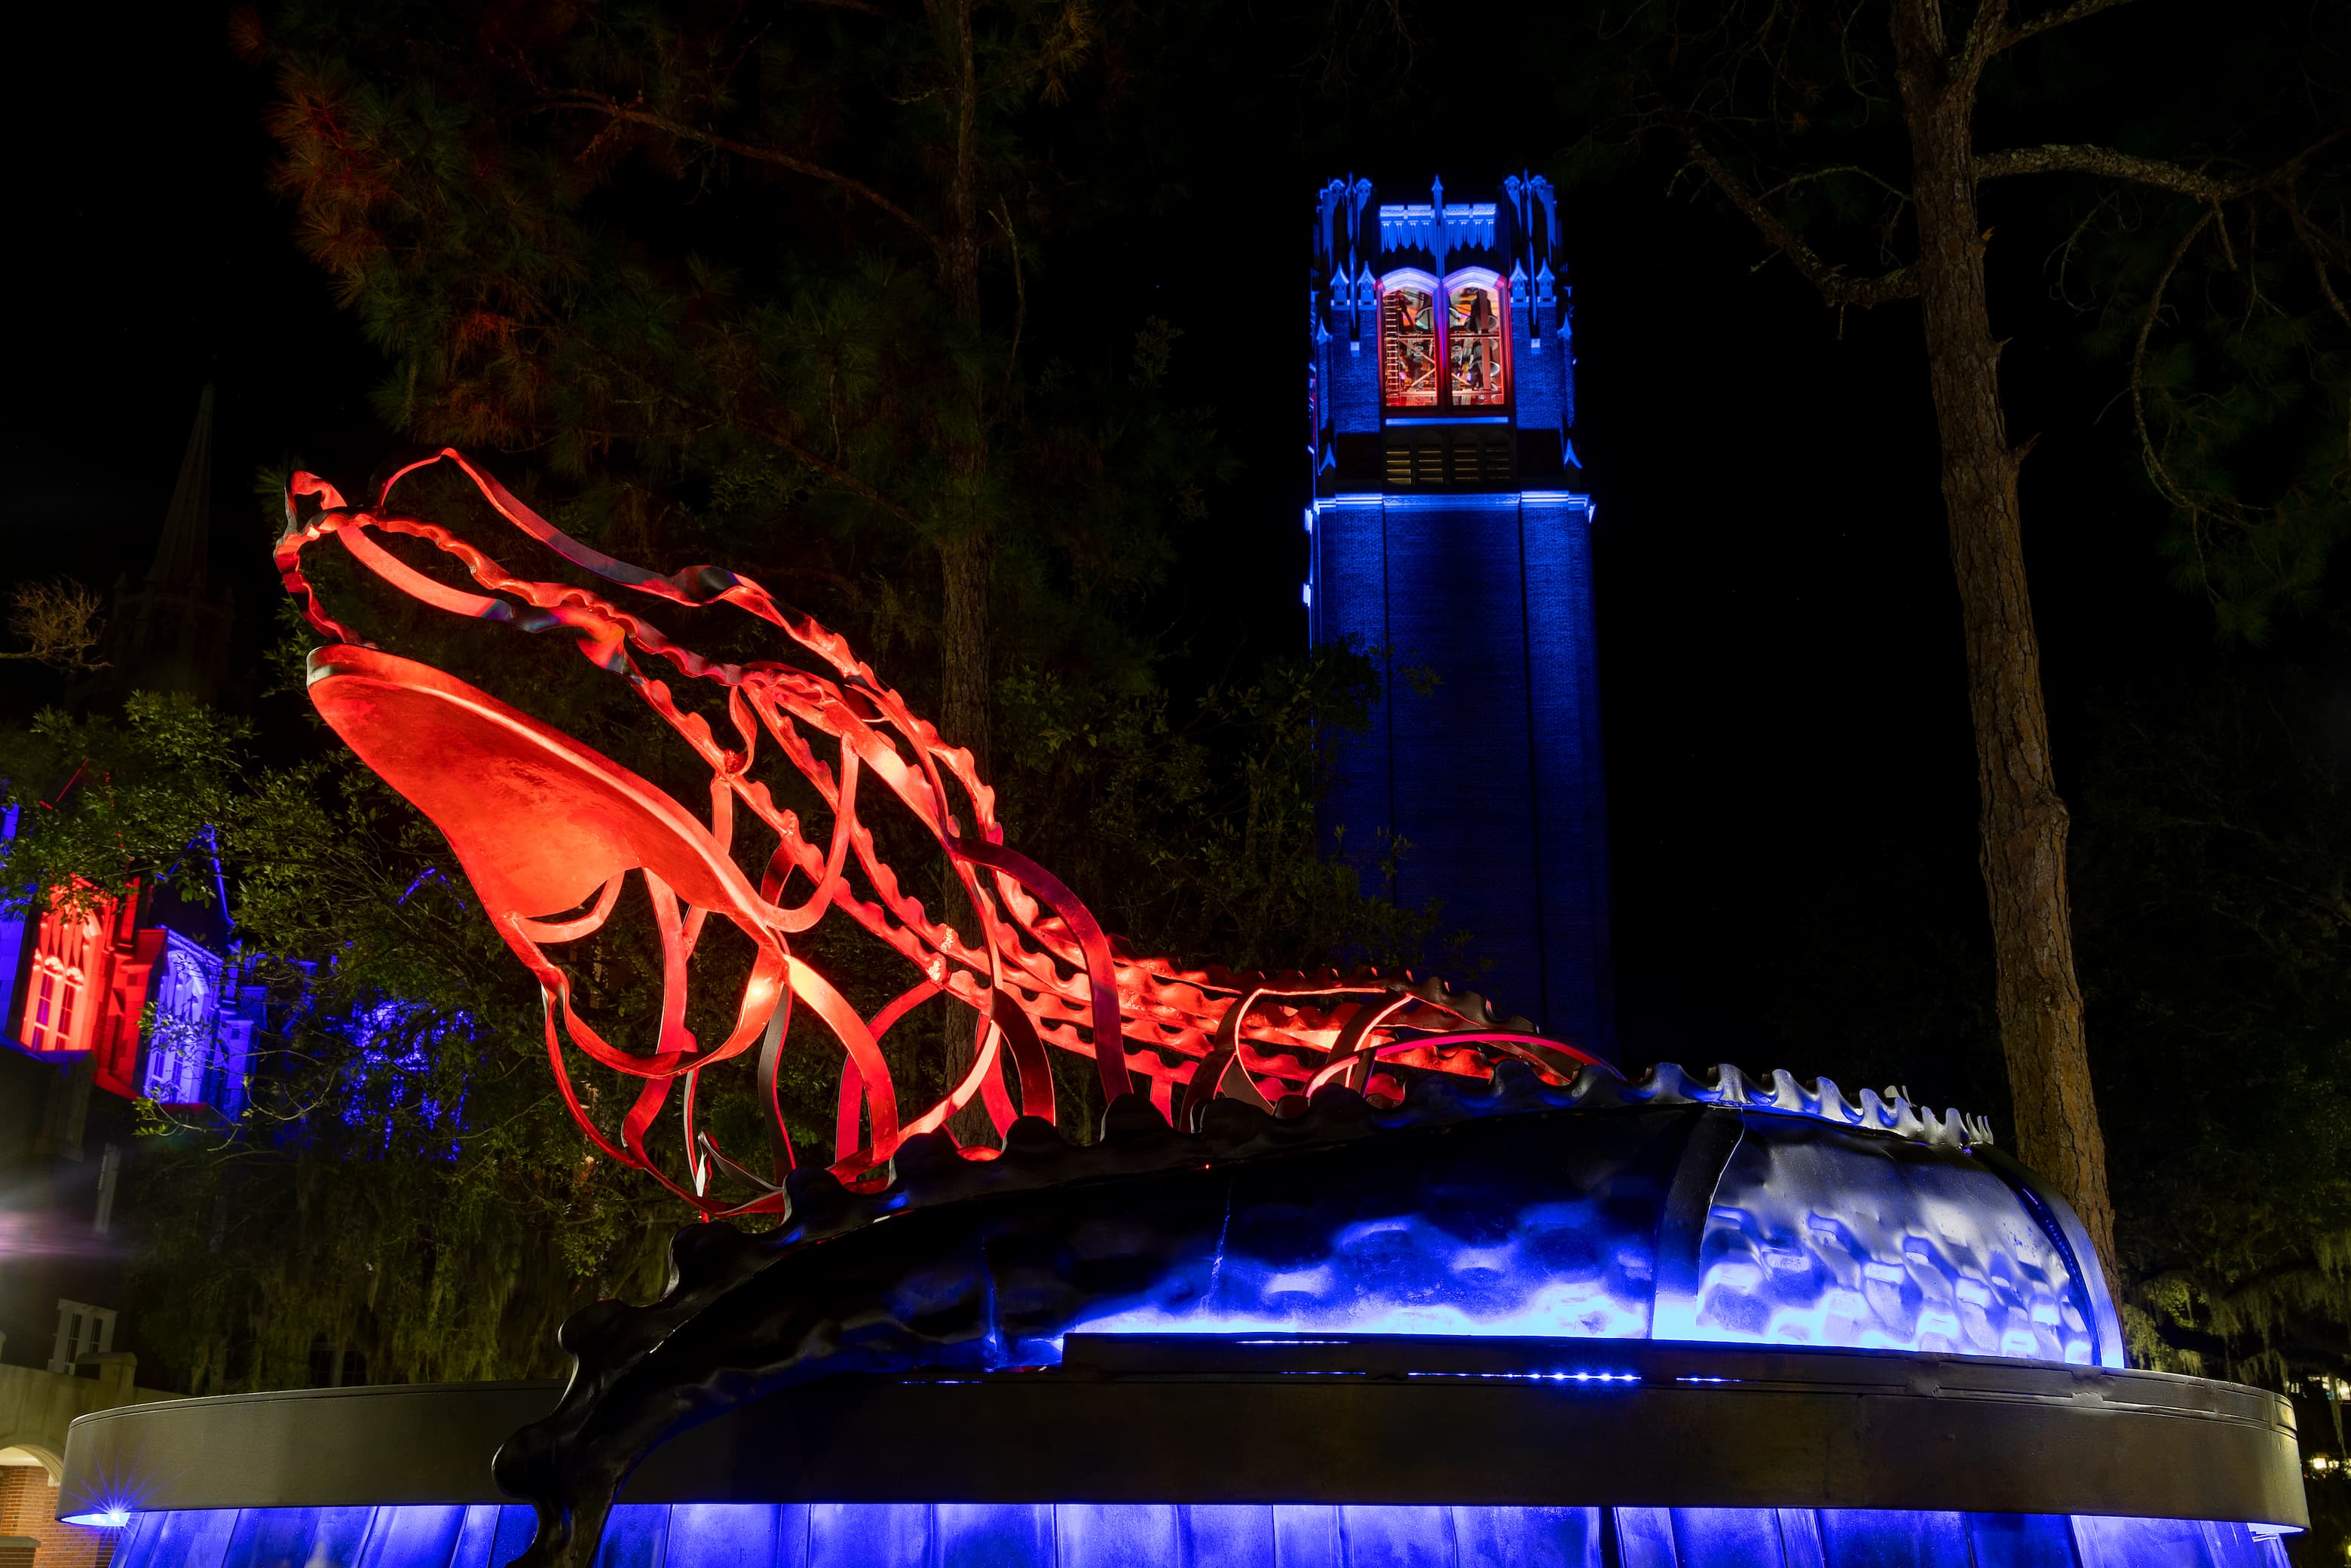 A steel statue of an alligator is illuminated with orange and blue lights at night with a blue-illuminated Century Tower behind